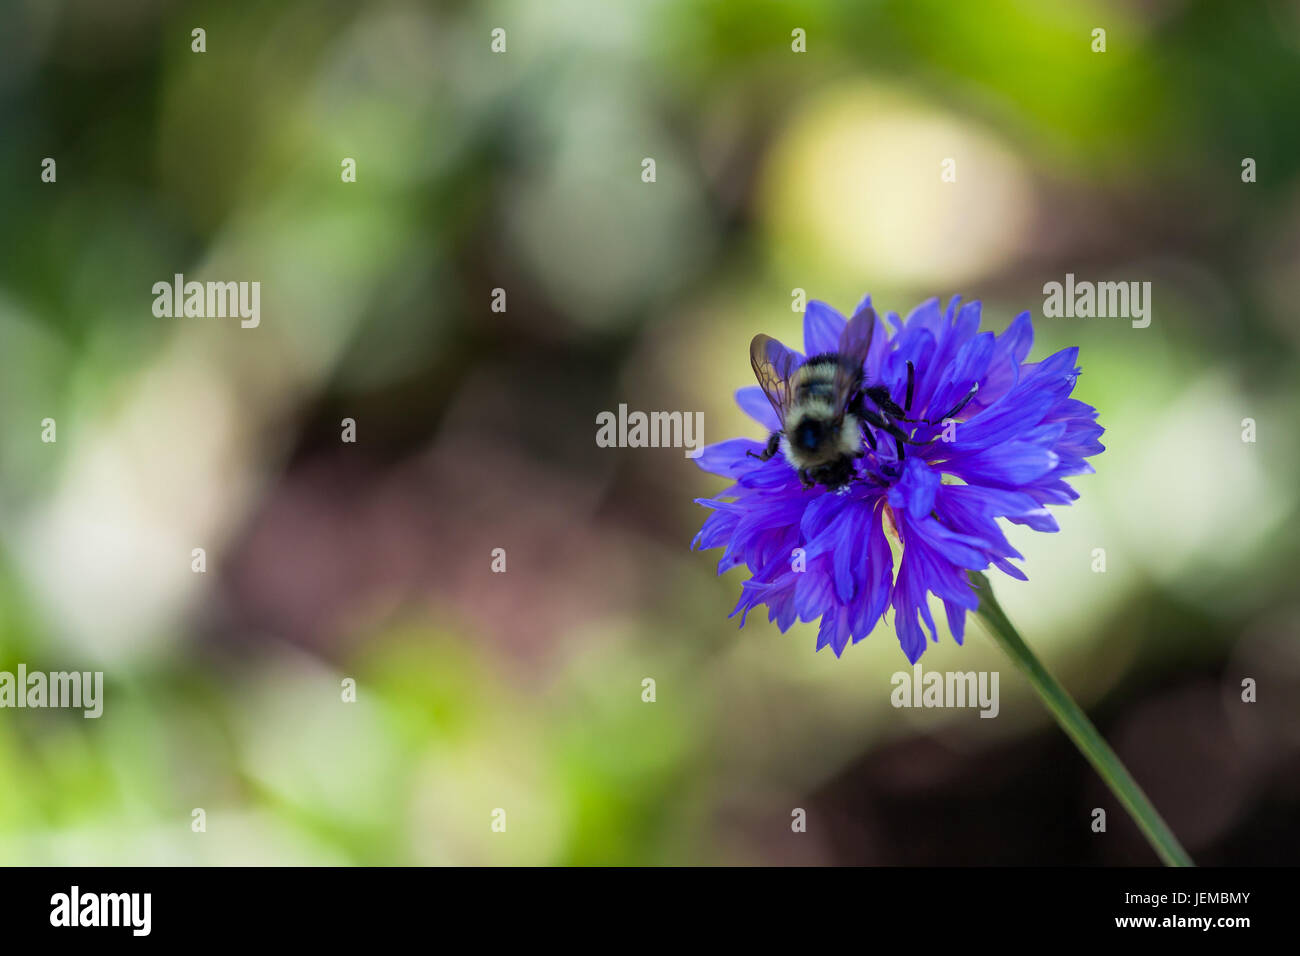 A large black and yellow fuzzy bubble bee on a purplish blue bachelor button flower with a blurred background. Stock Photo